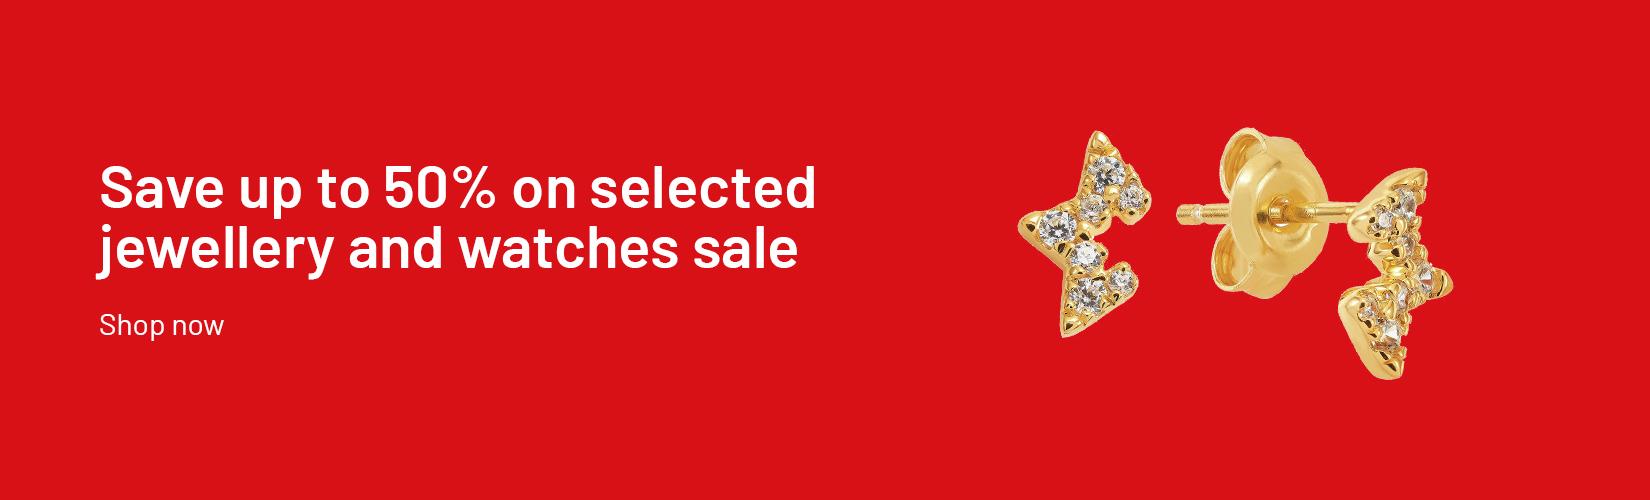 Save up to 50% on selected jewellery and watches sale.